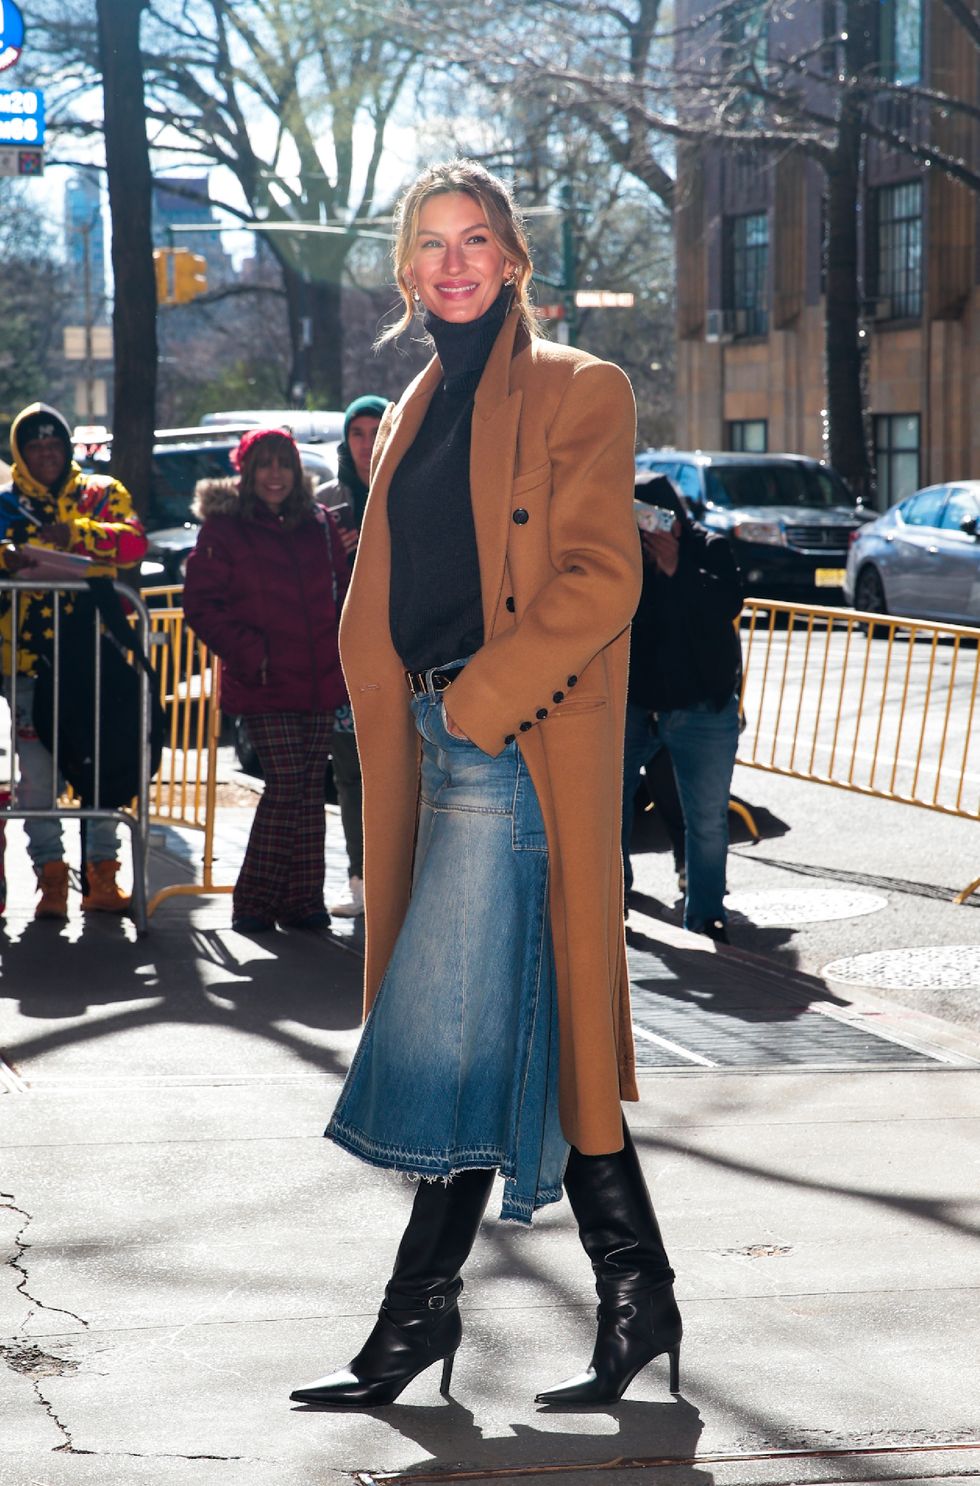 new york, ny march 21 gisele bundchen is seen arriving for an appearance on the view on march 21, 2024 in new york, new york photo by megagc images